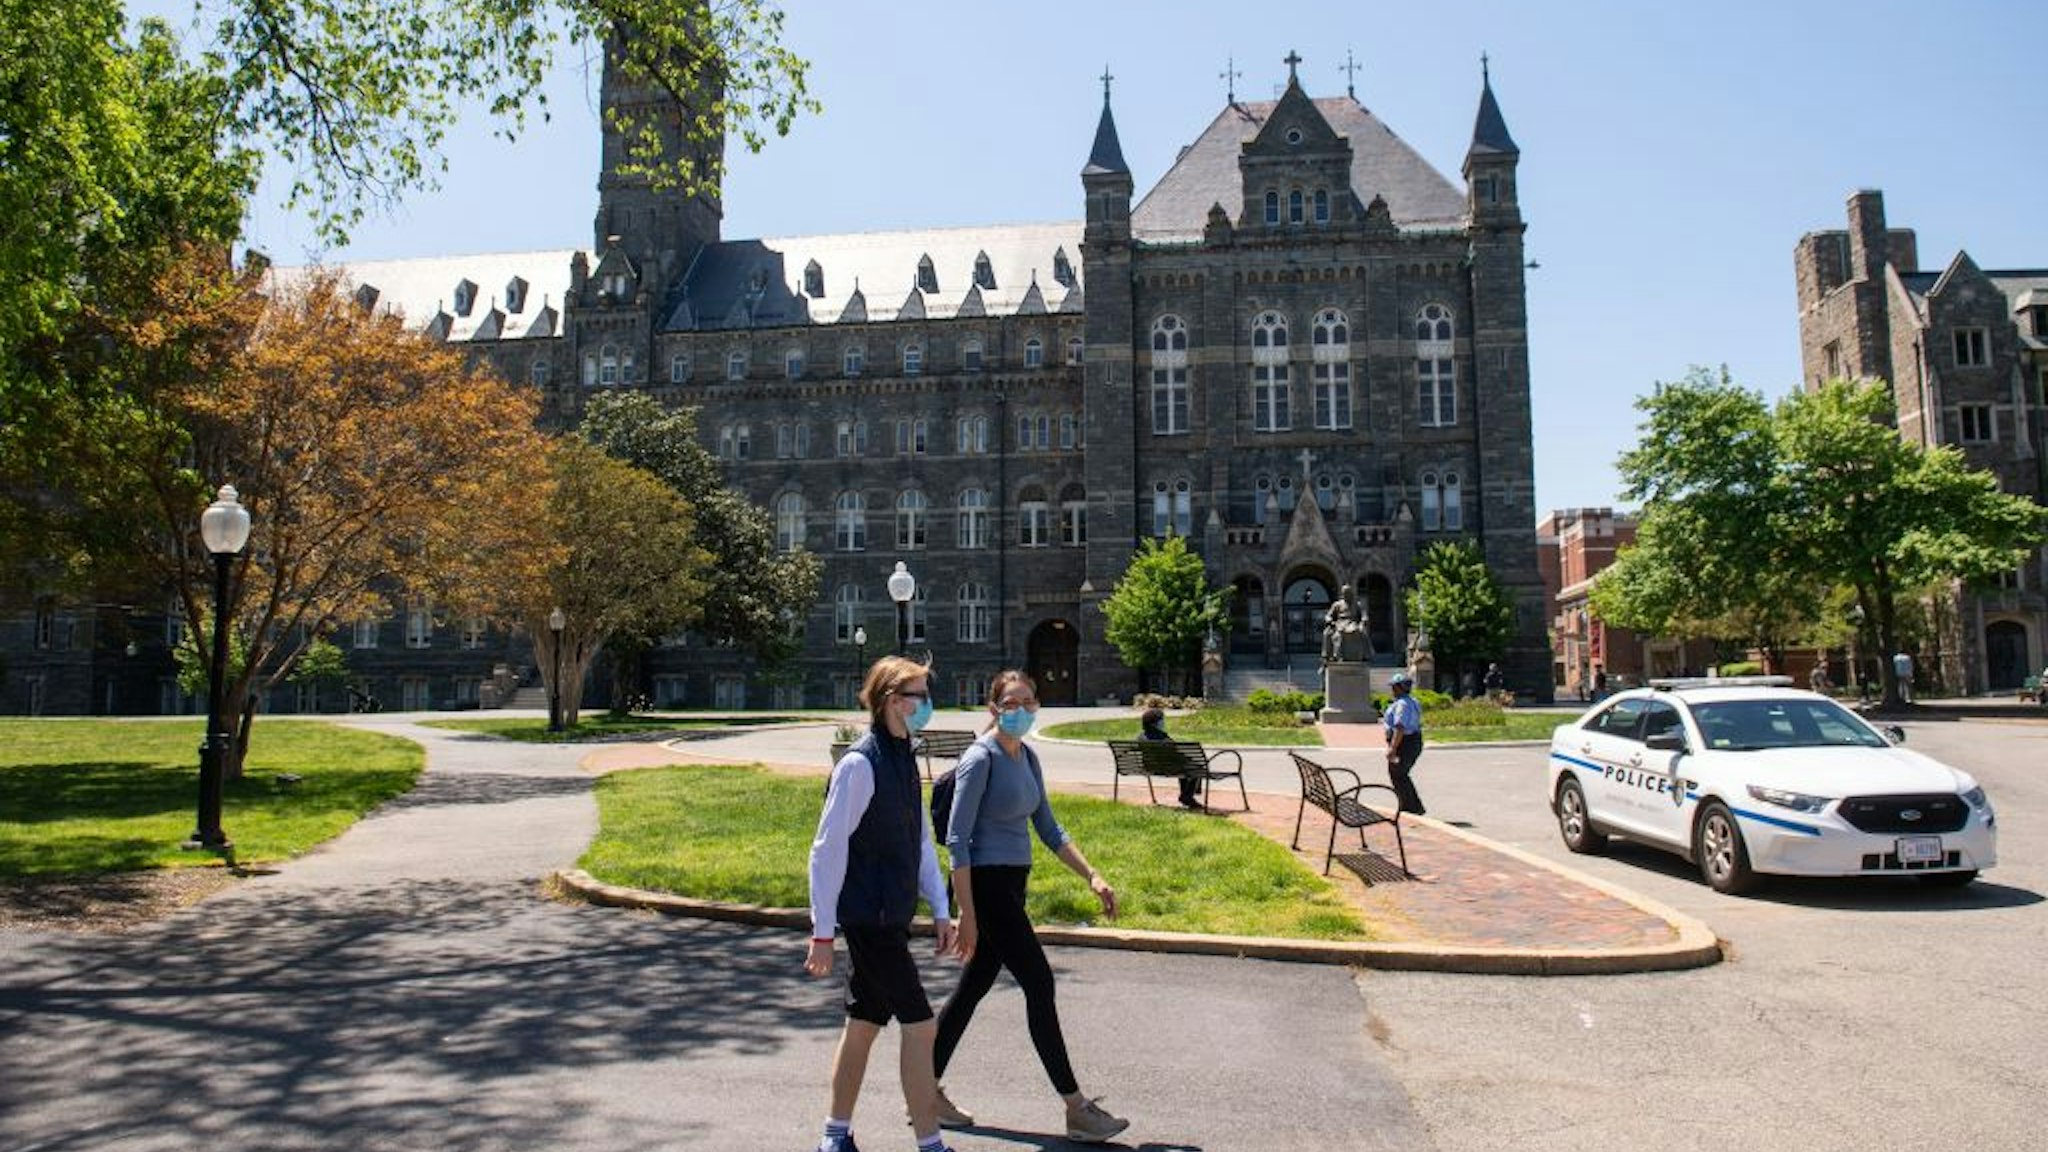 The campus of Georgetown University is seen nearly empty as classes were canceled due to the coronavirus pandemic, in Washington, DC, May 7, 2020.